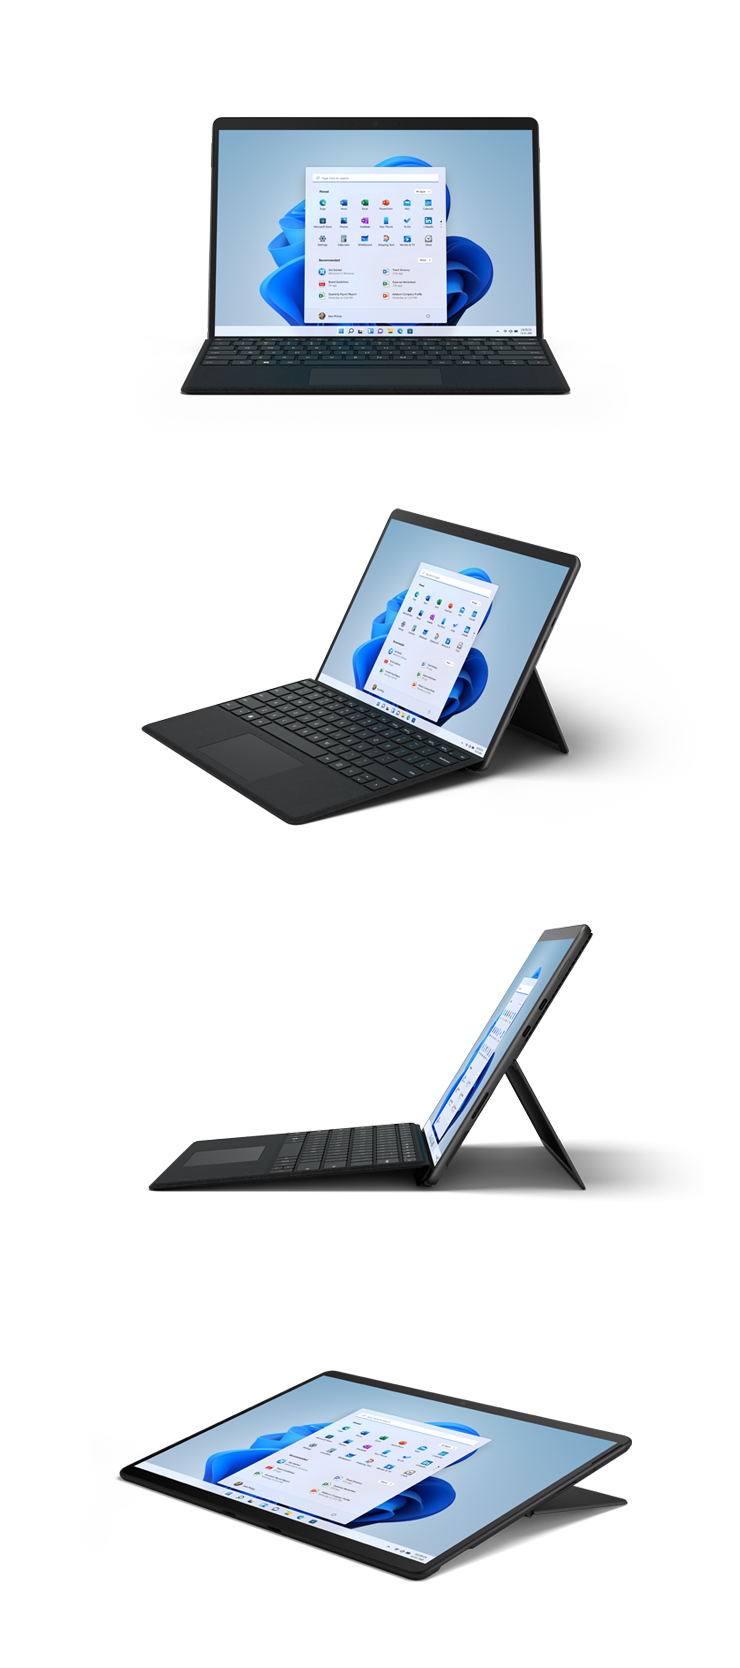 Renders of a Graphite Surface Pro 8 from straight on, angled, side-view, and studio mode.